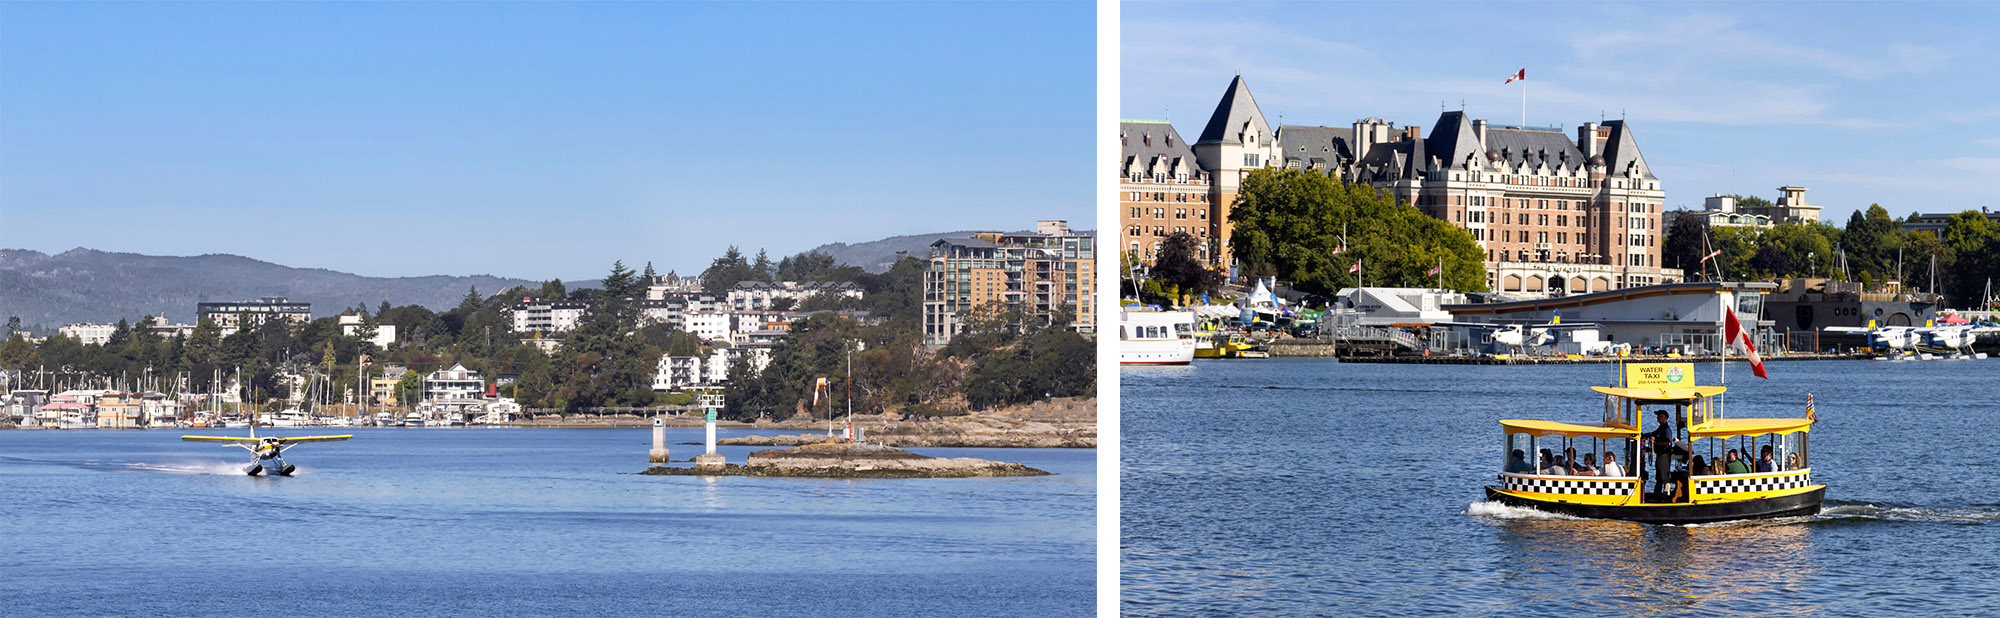 Views of Victoria's stunning inner harbour and Sooke hills.